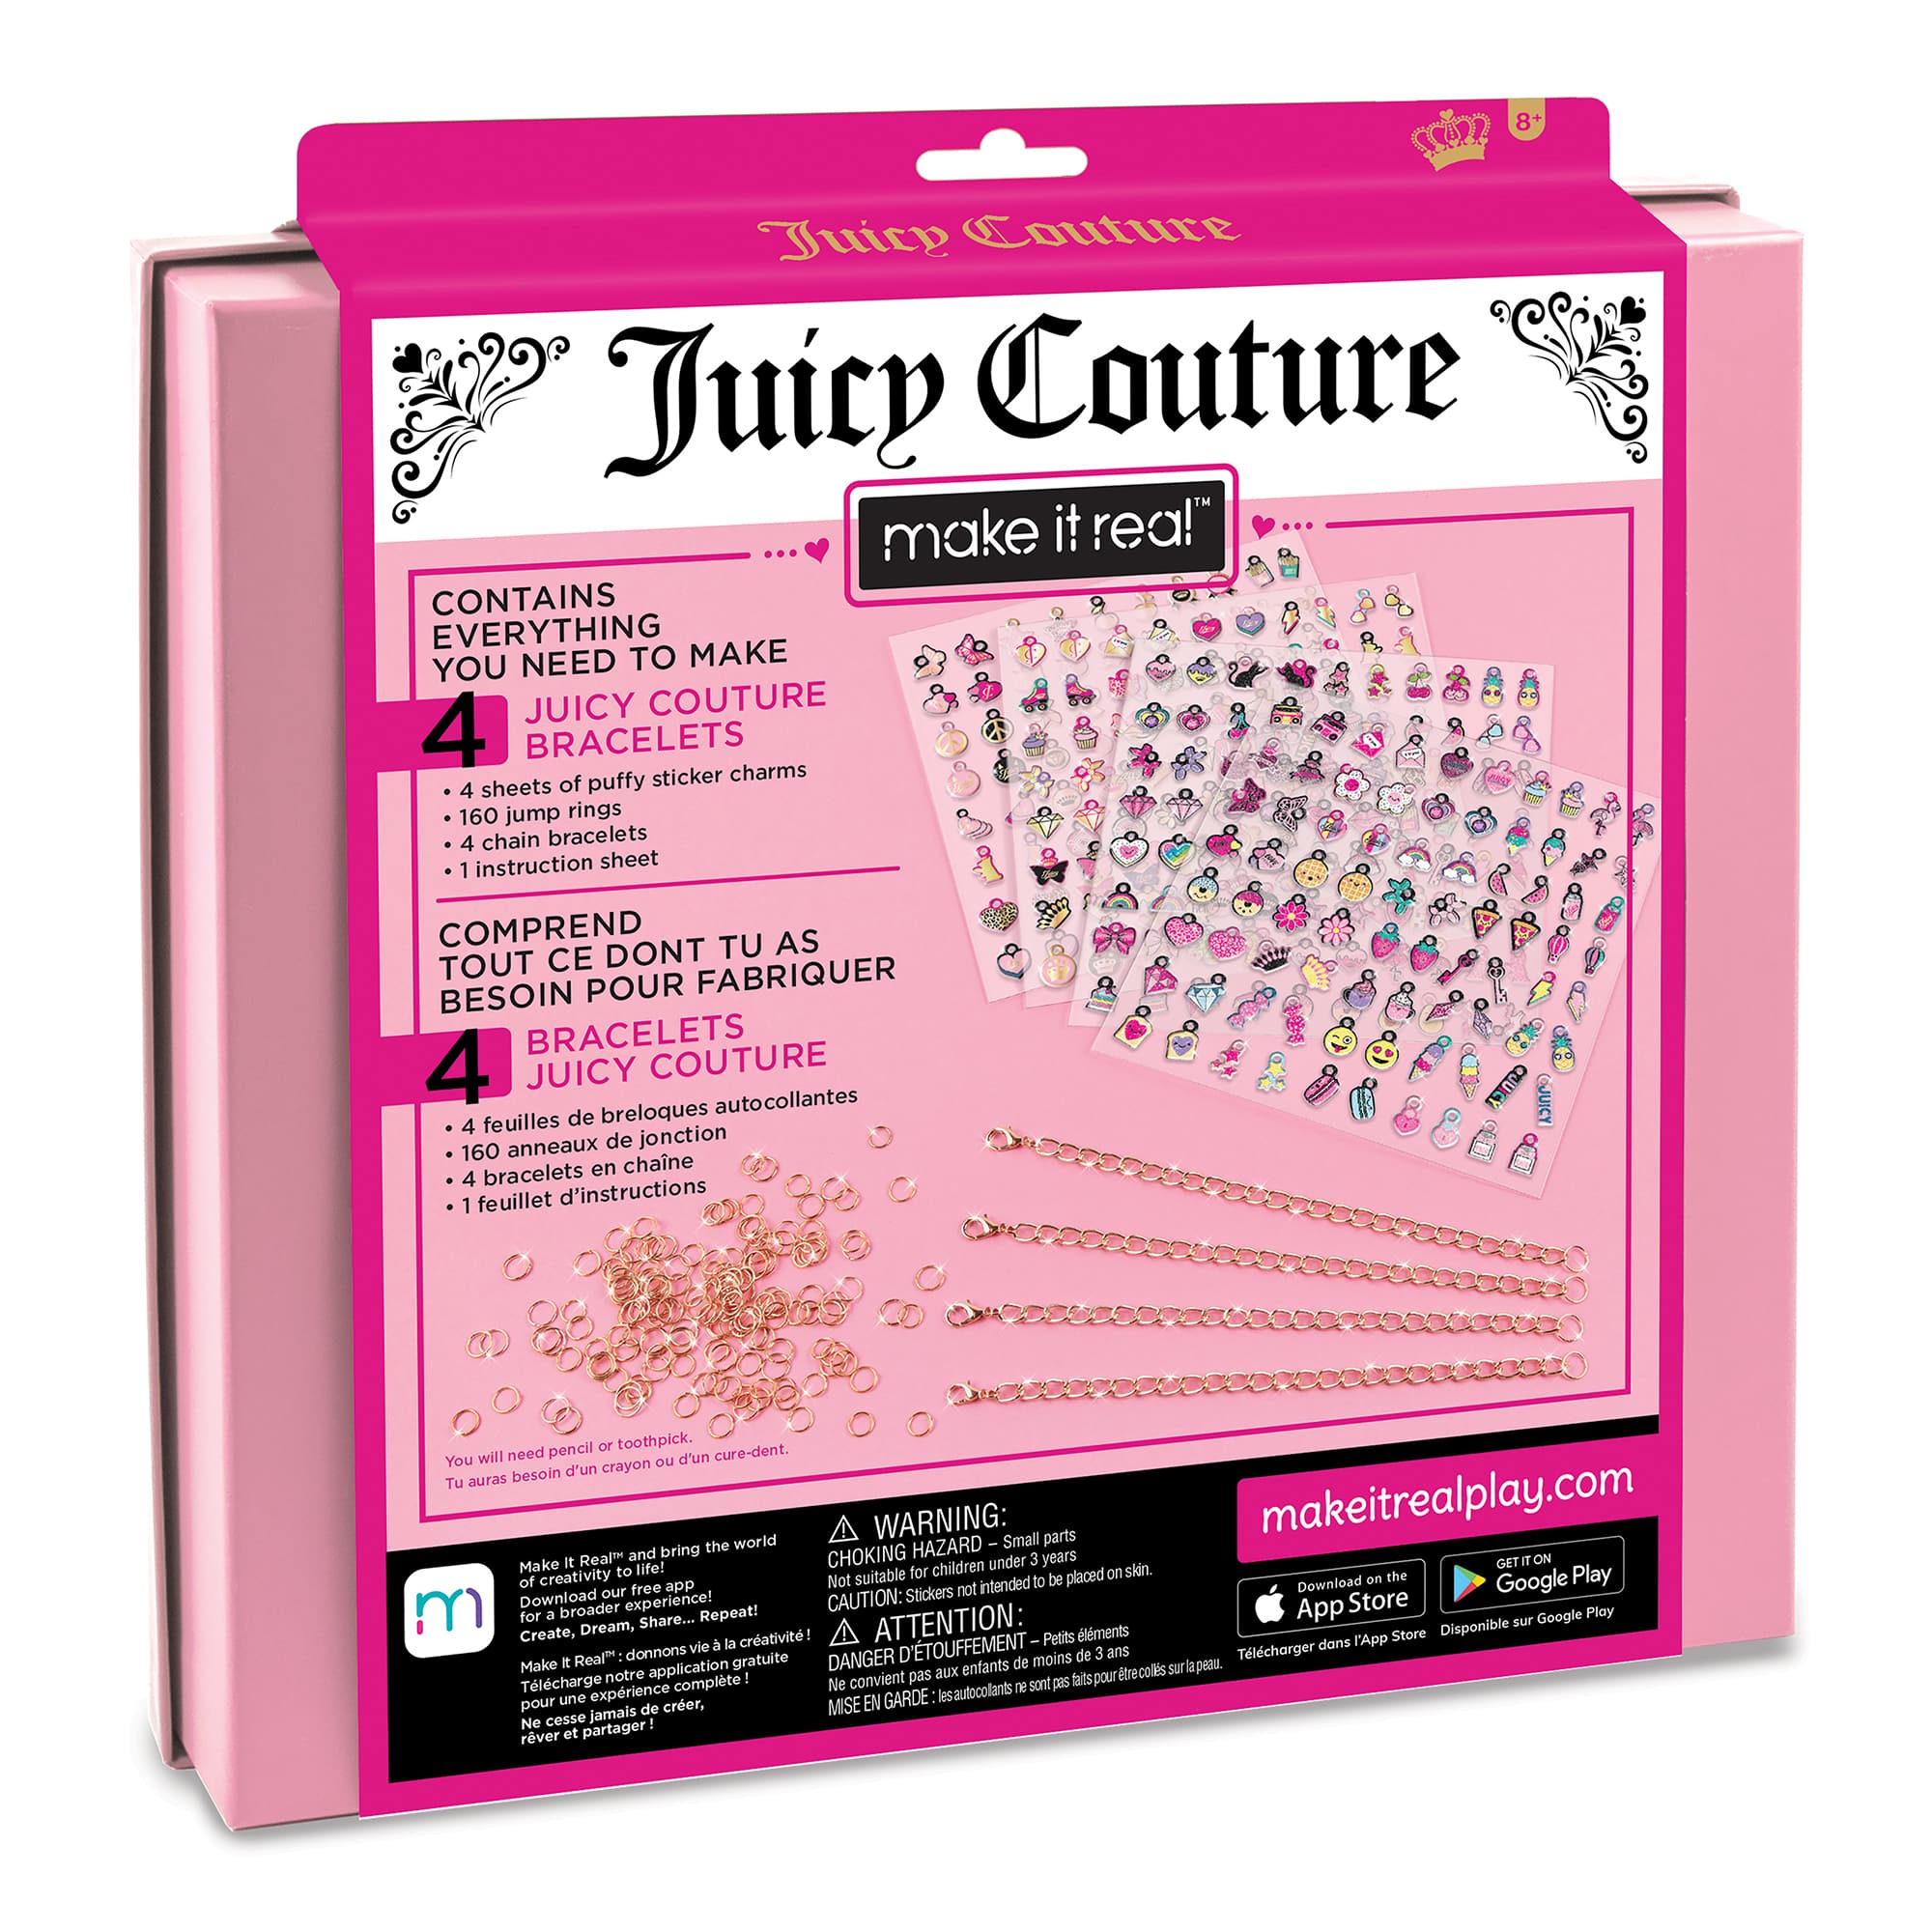 Juicy Couture Make it Real&#x2122; Absolutely Charming Bracelet Kit